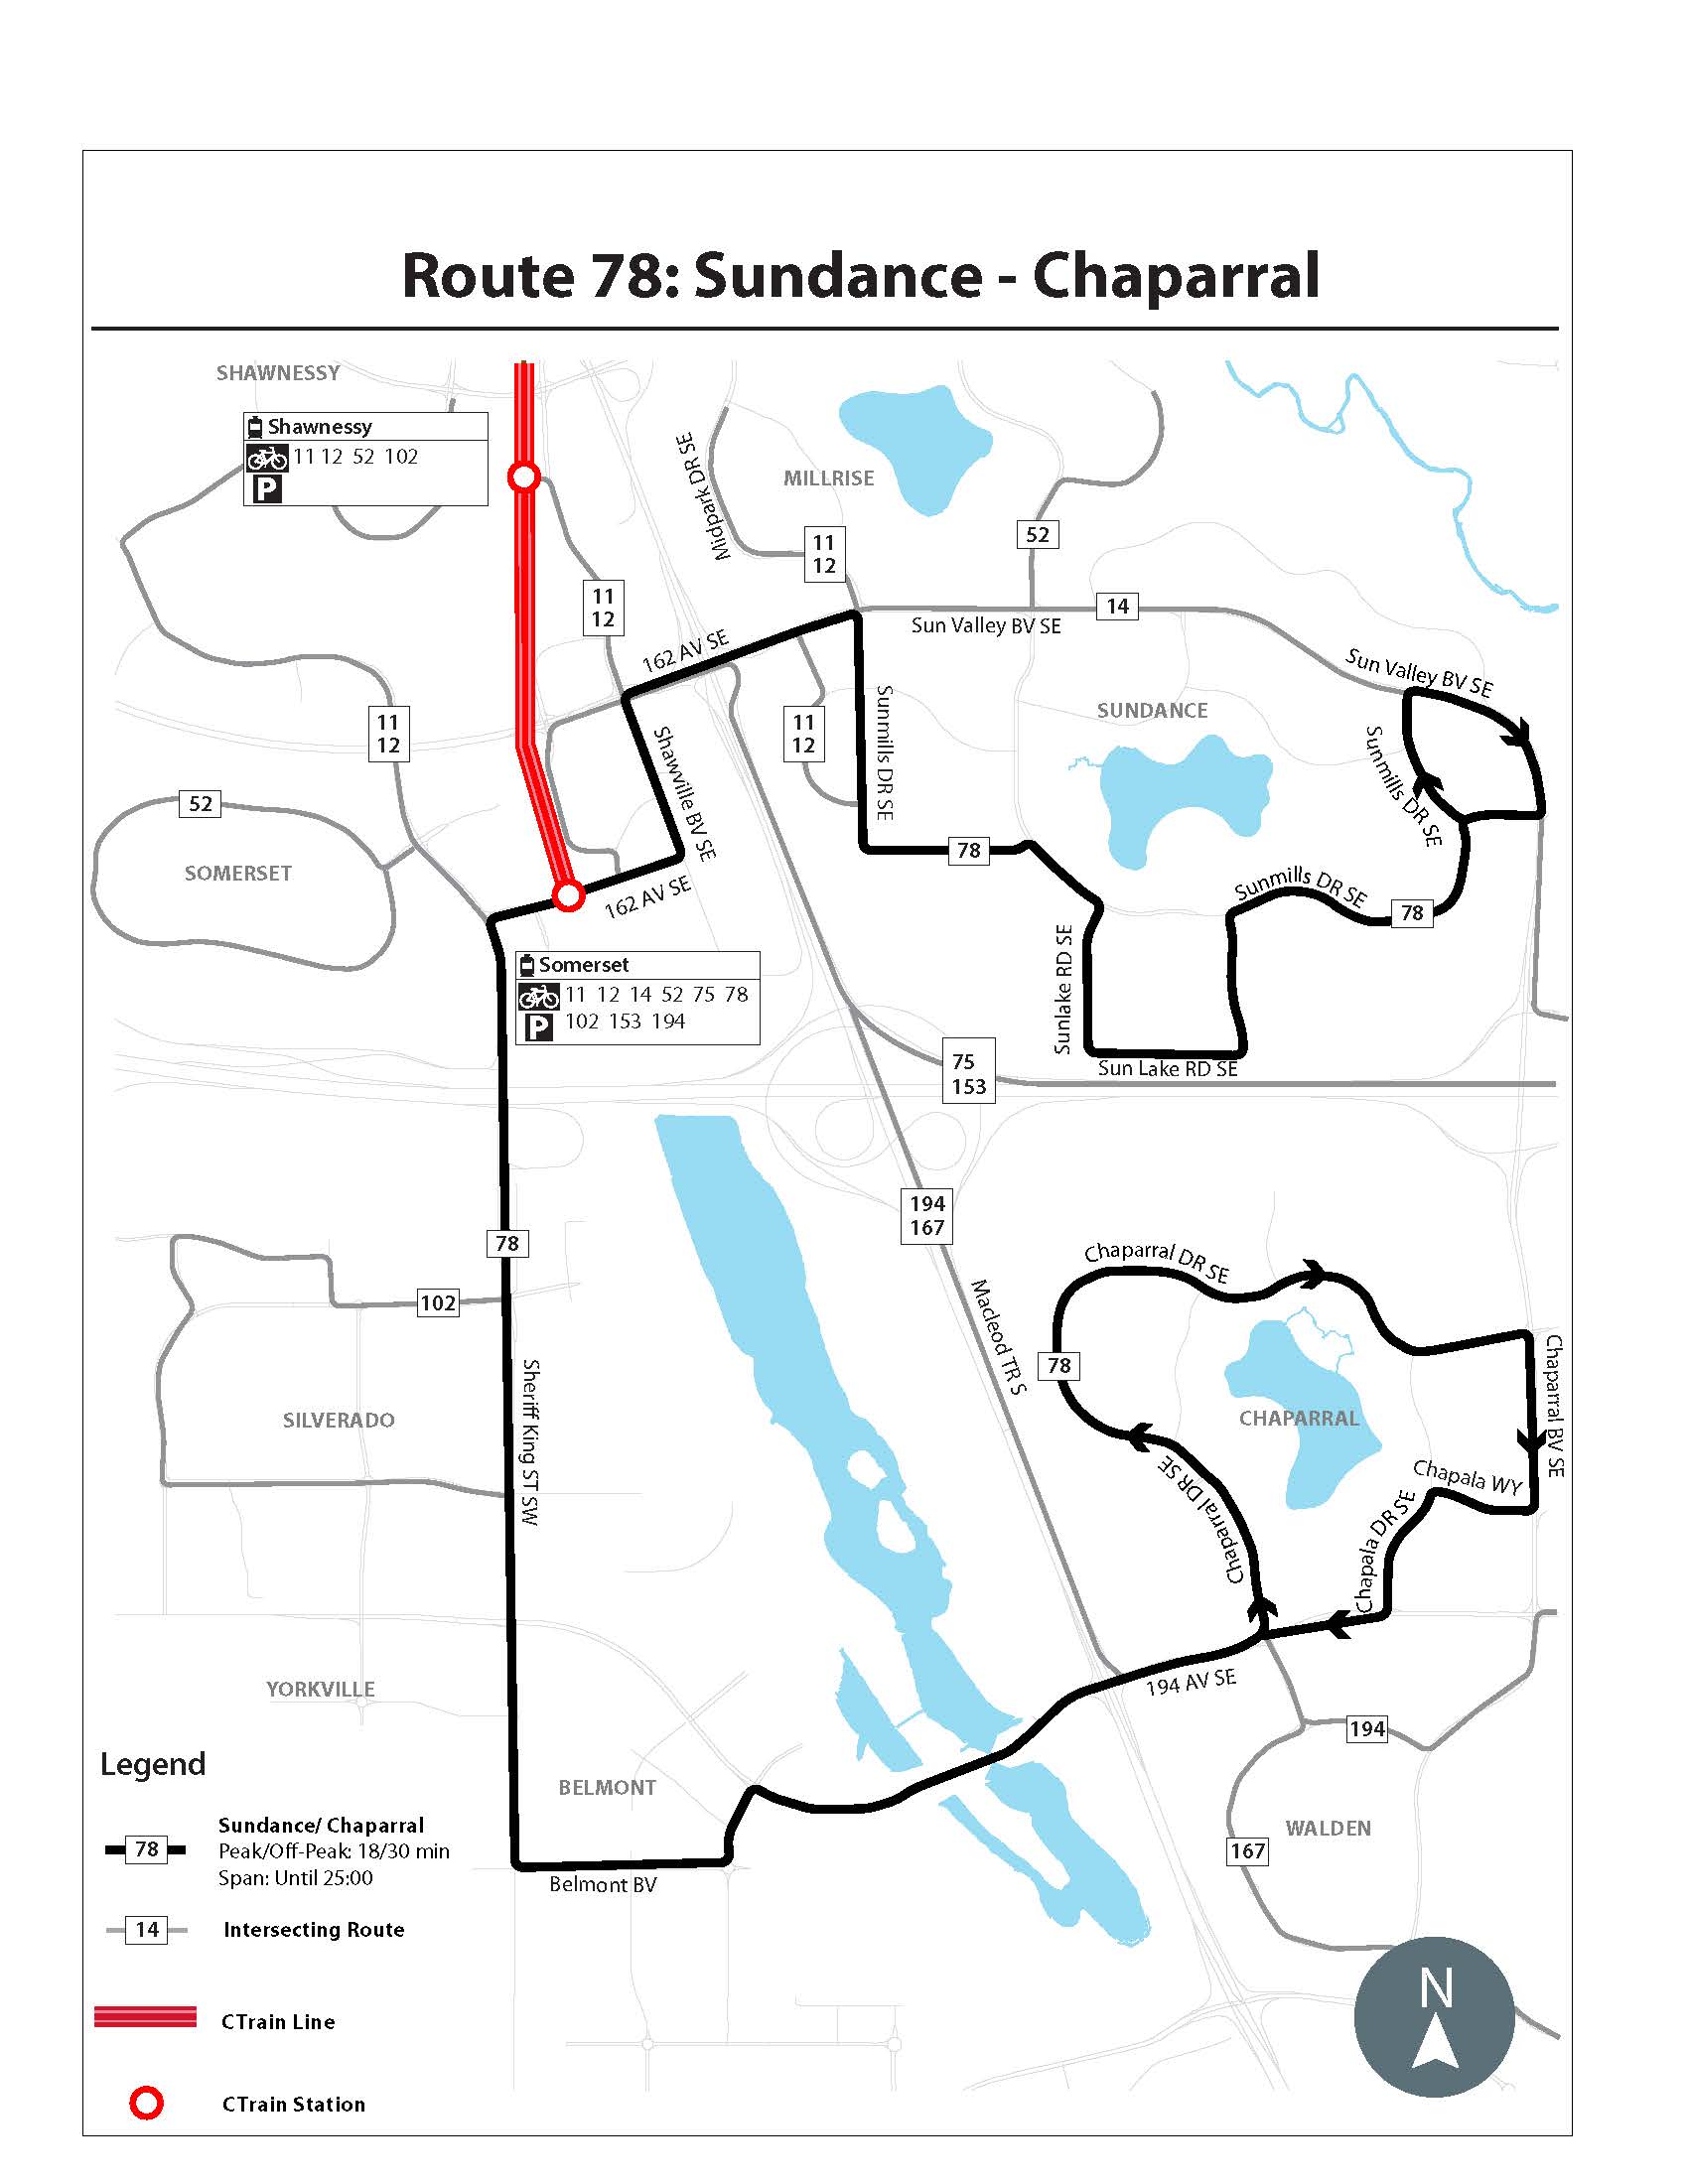 Route 78 route changes 2022